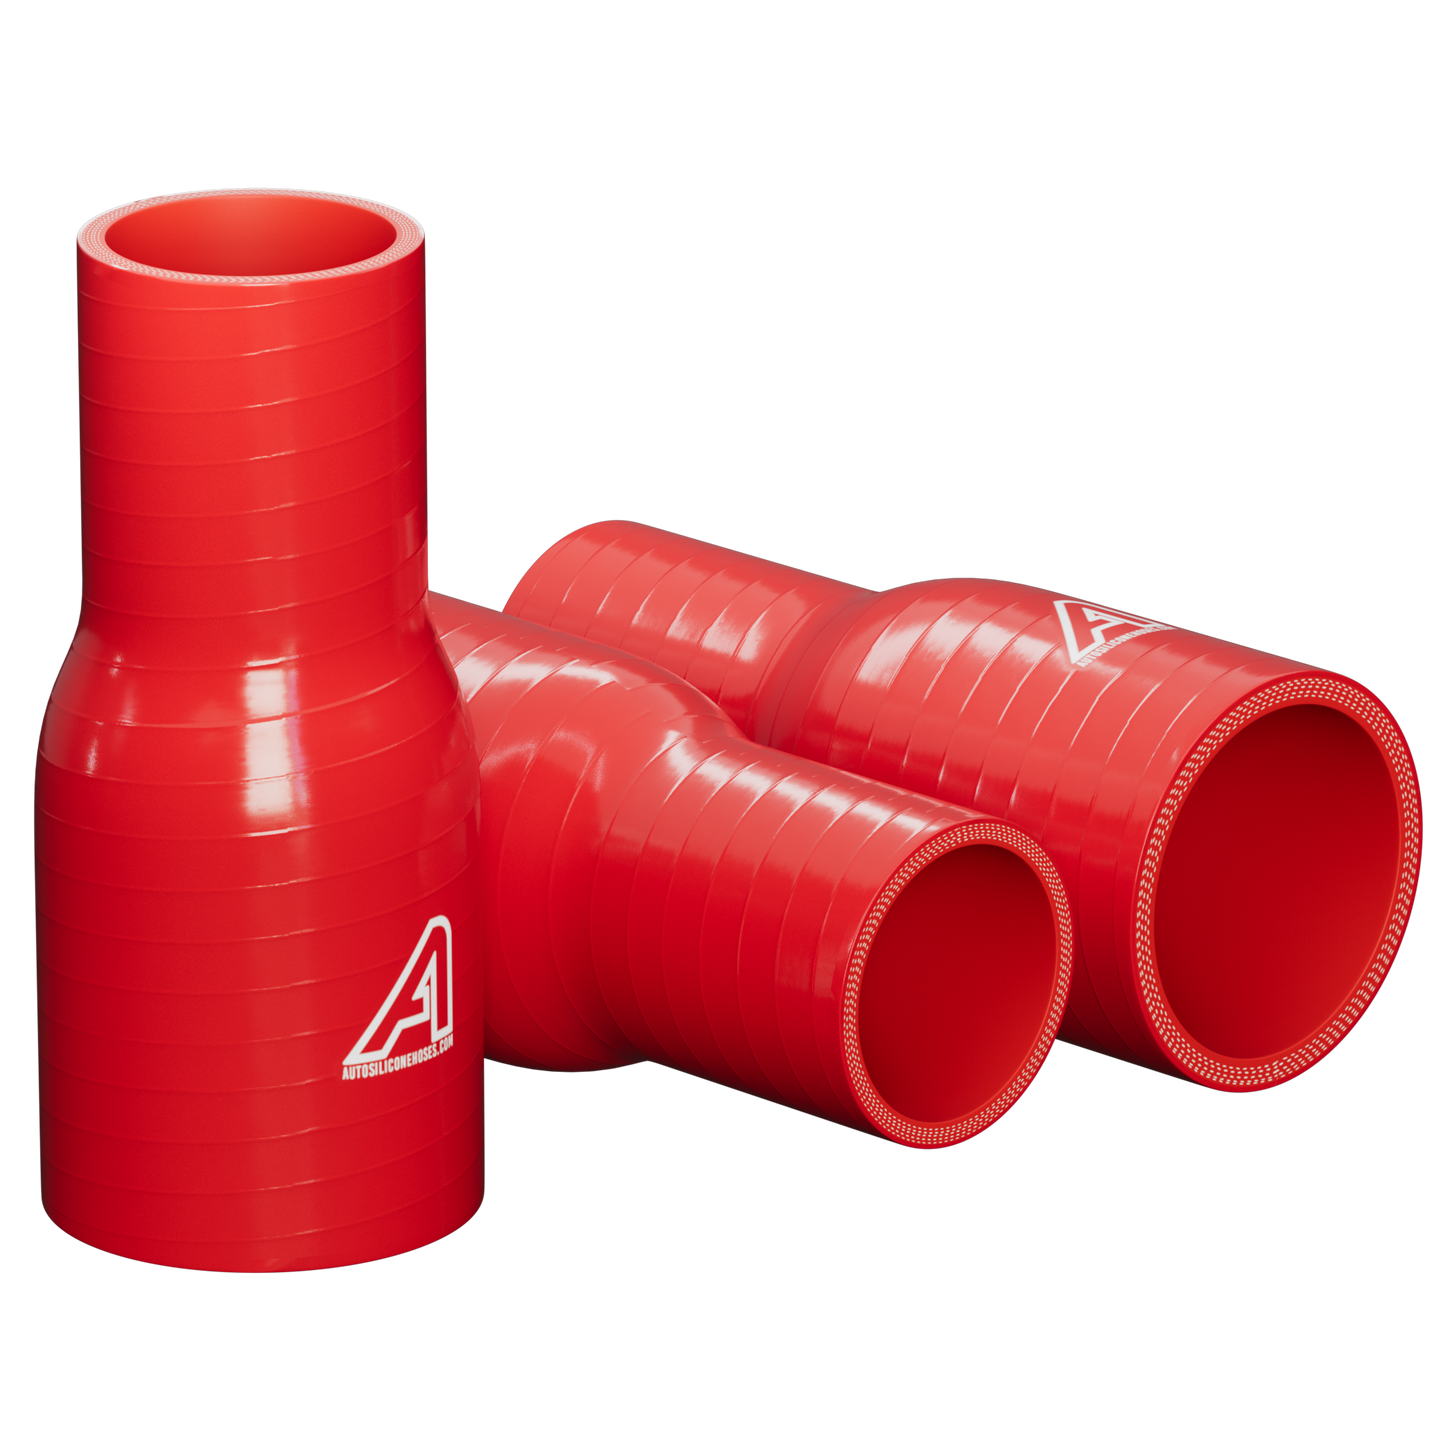 Straight Reducer Silicone Hoses Red - Hoses UK